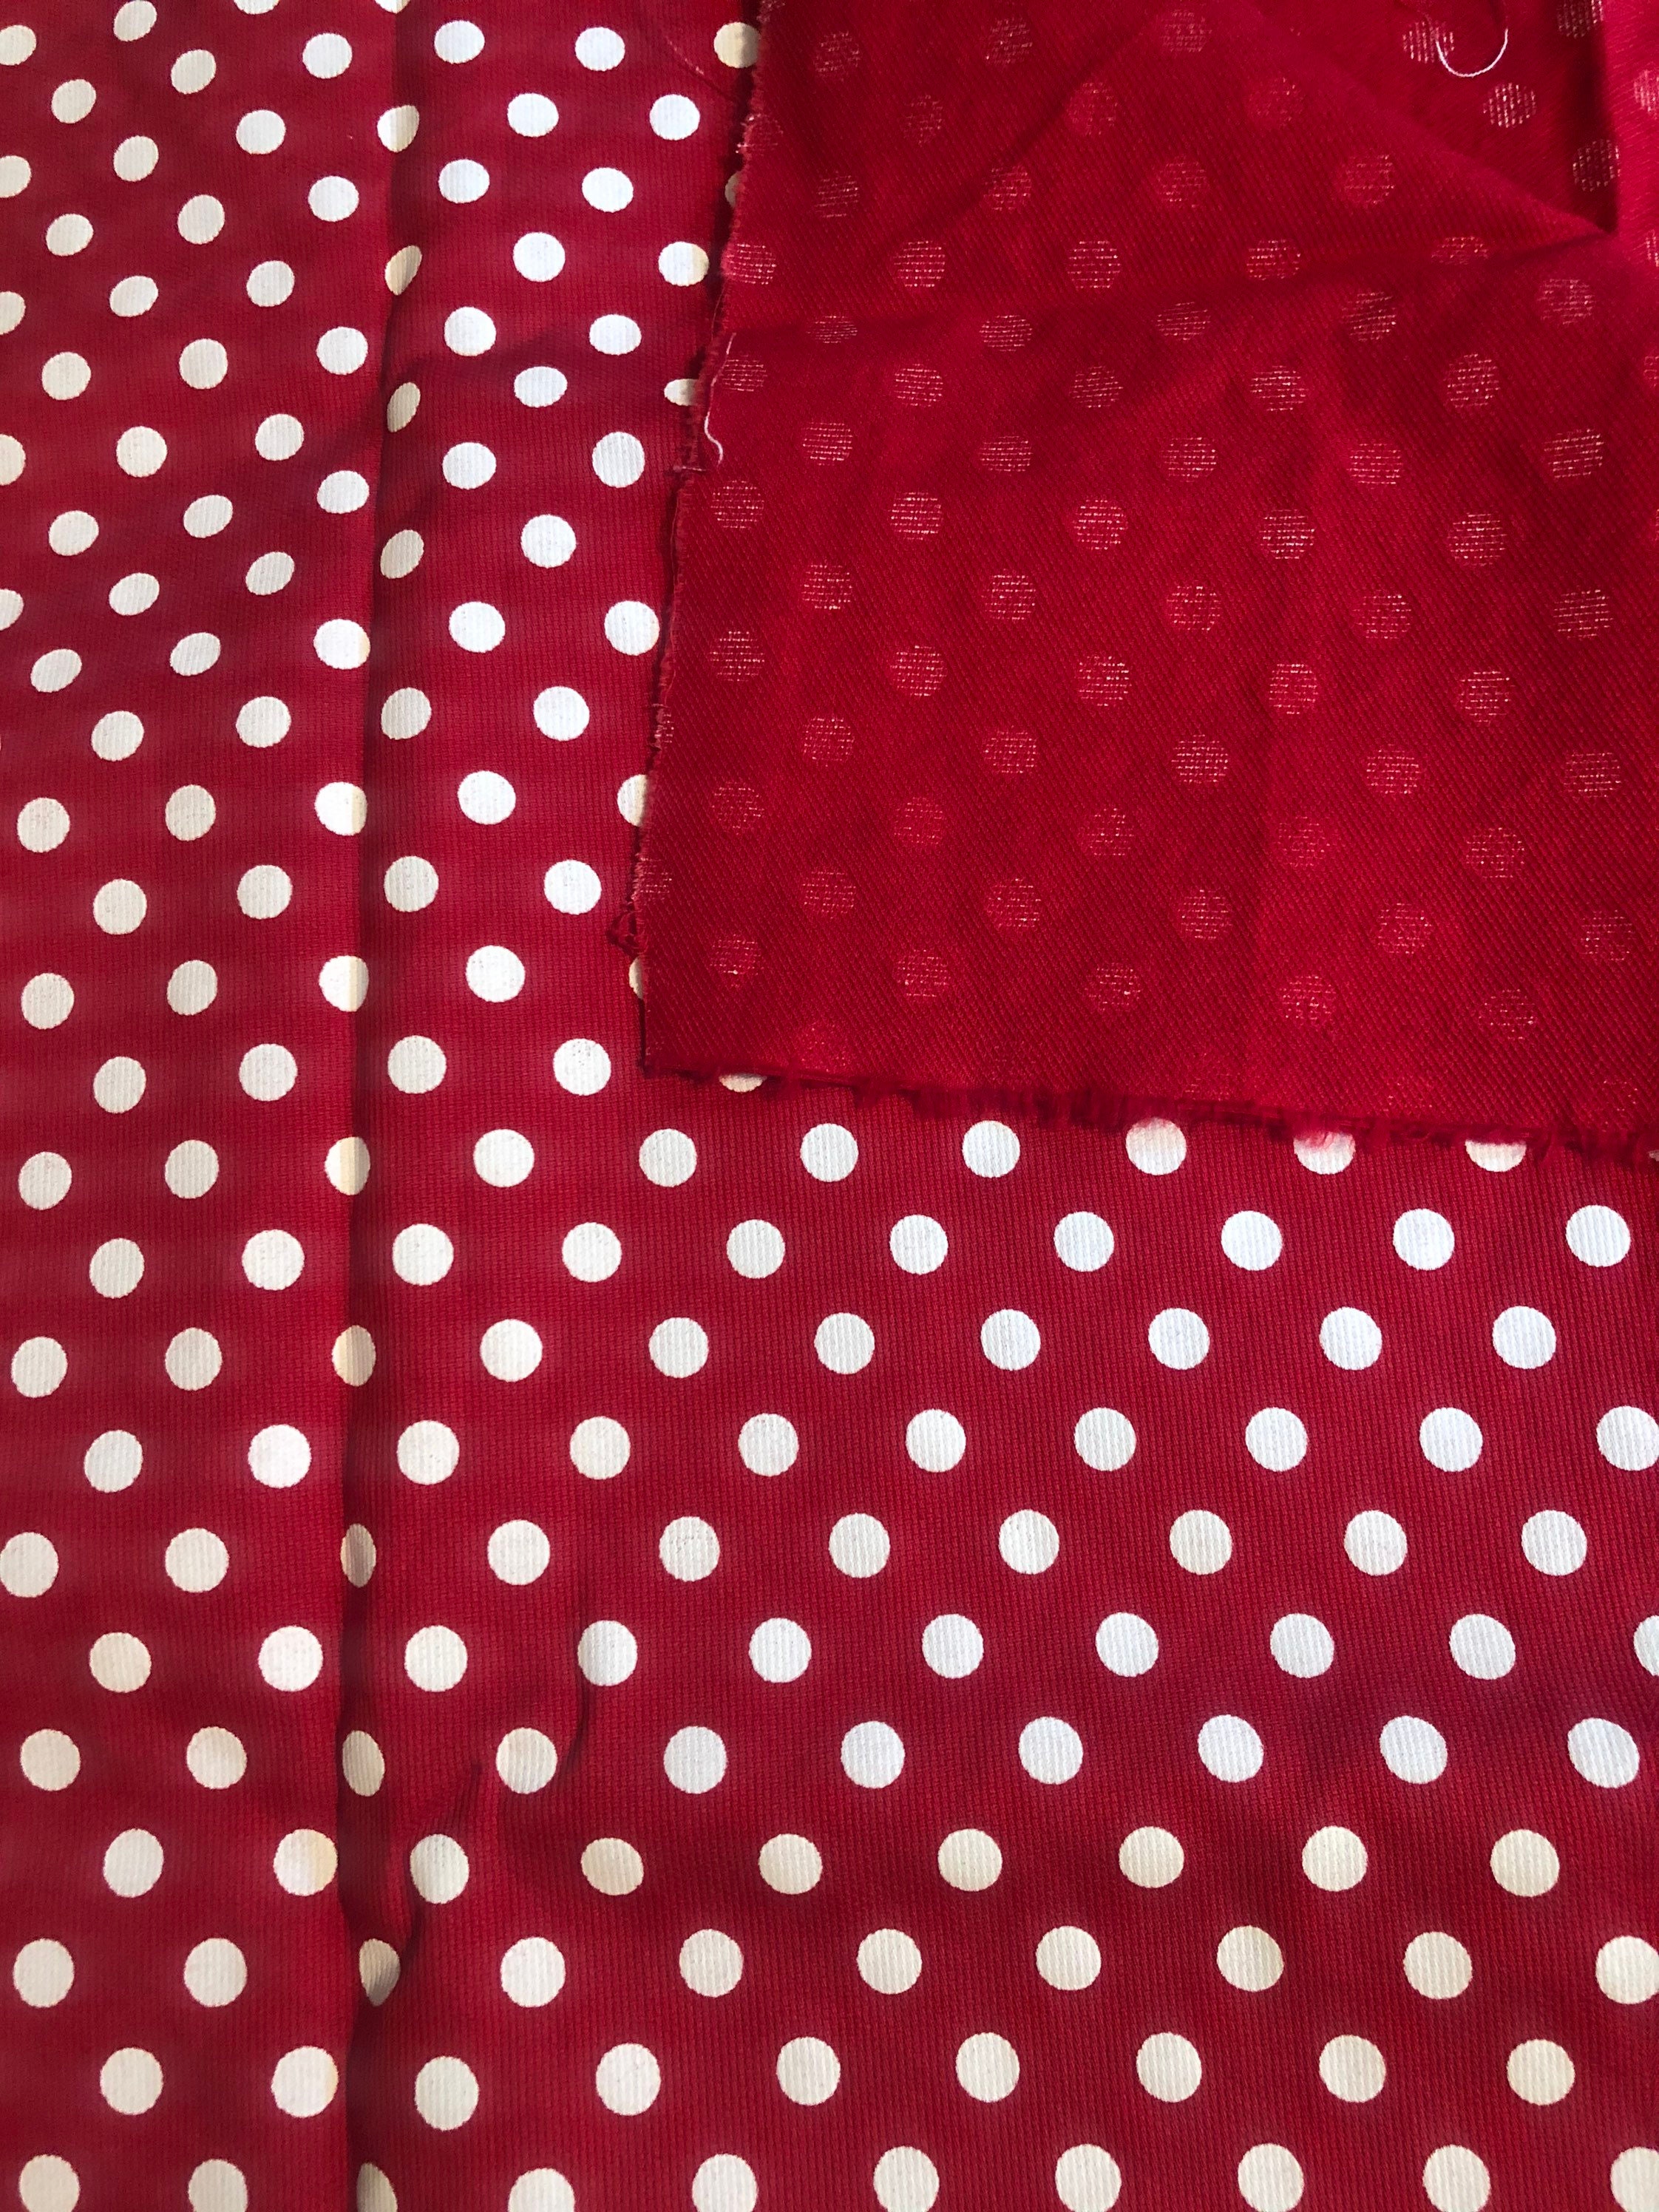 Red and White Polka Dot Fabric Material Textured - Etsy